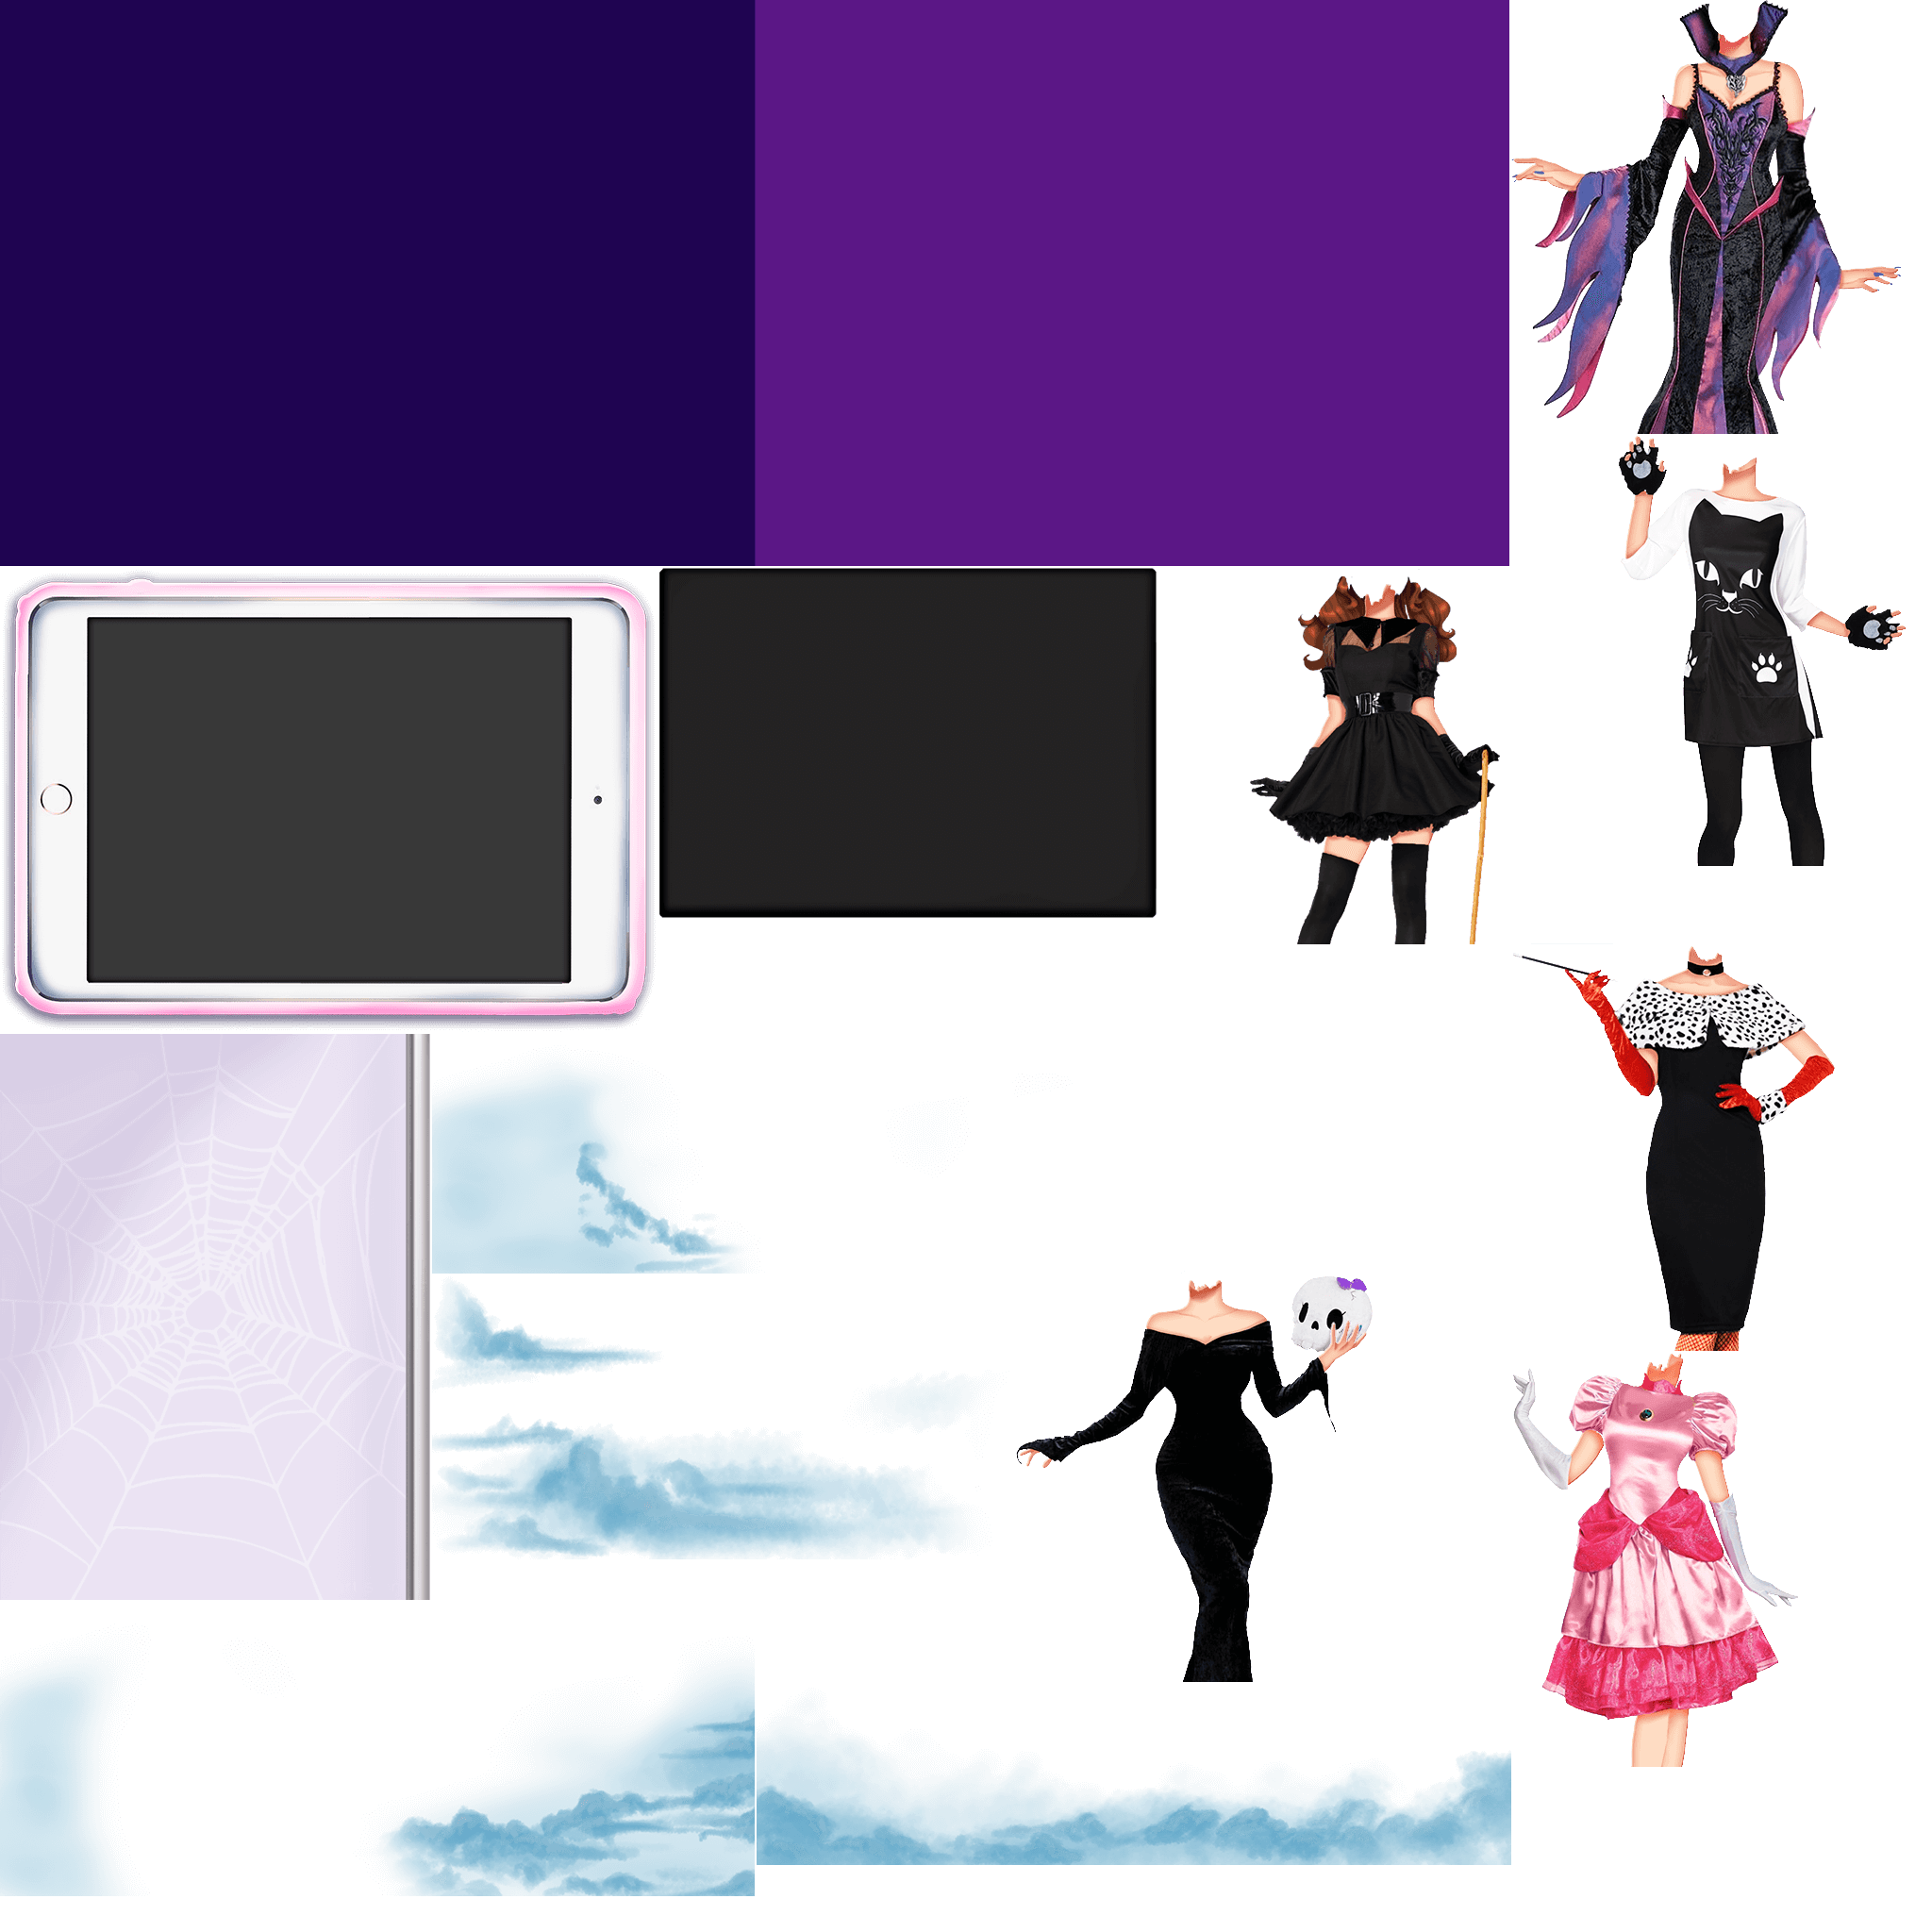 Dark Academia Gacha Club Outfit  Club outfits, Club outfit ideas, Outfits